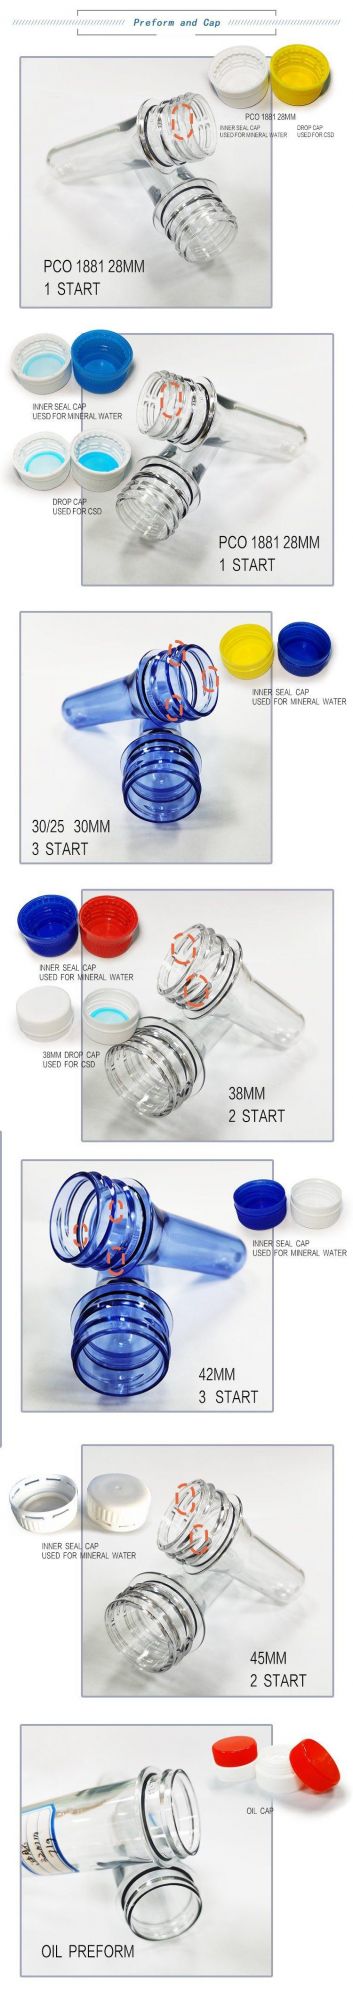 100% New Resin Pet Plastic Bottle Preform with Handle and Cap